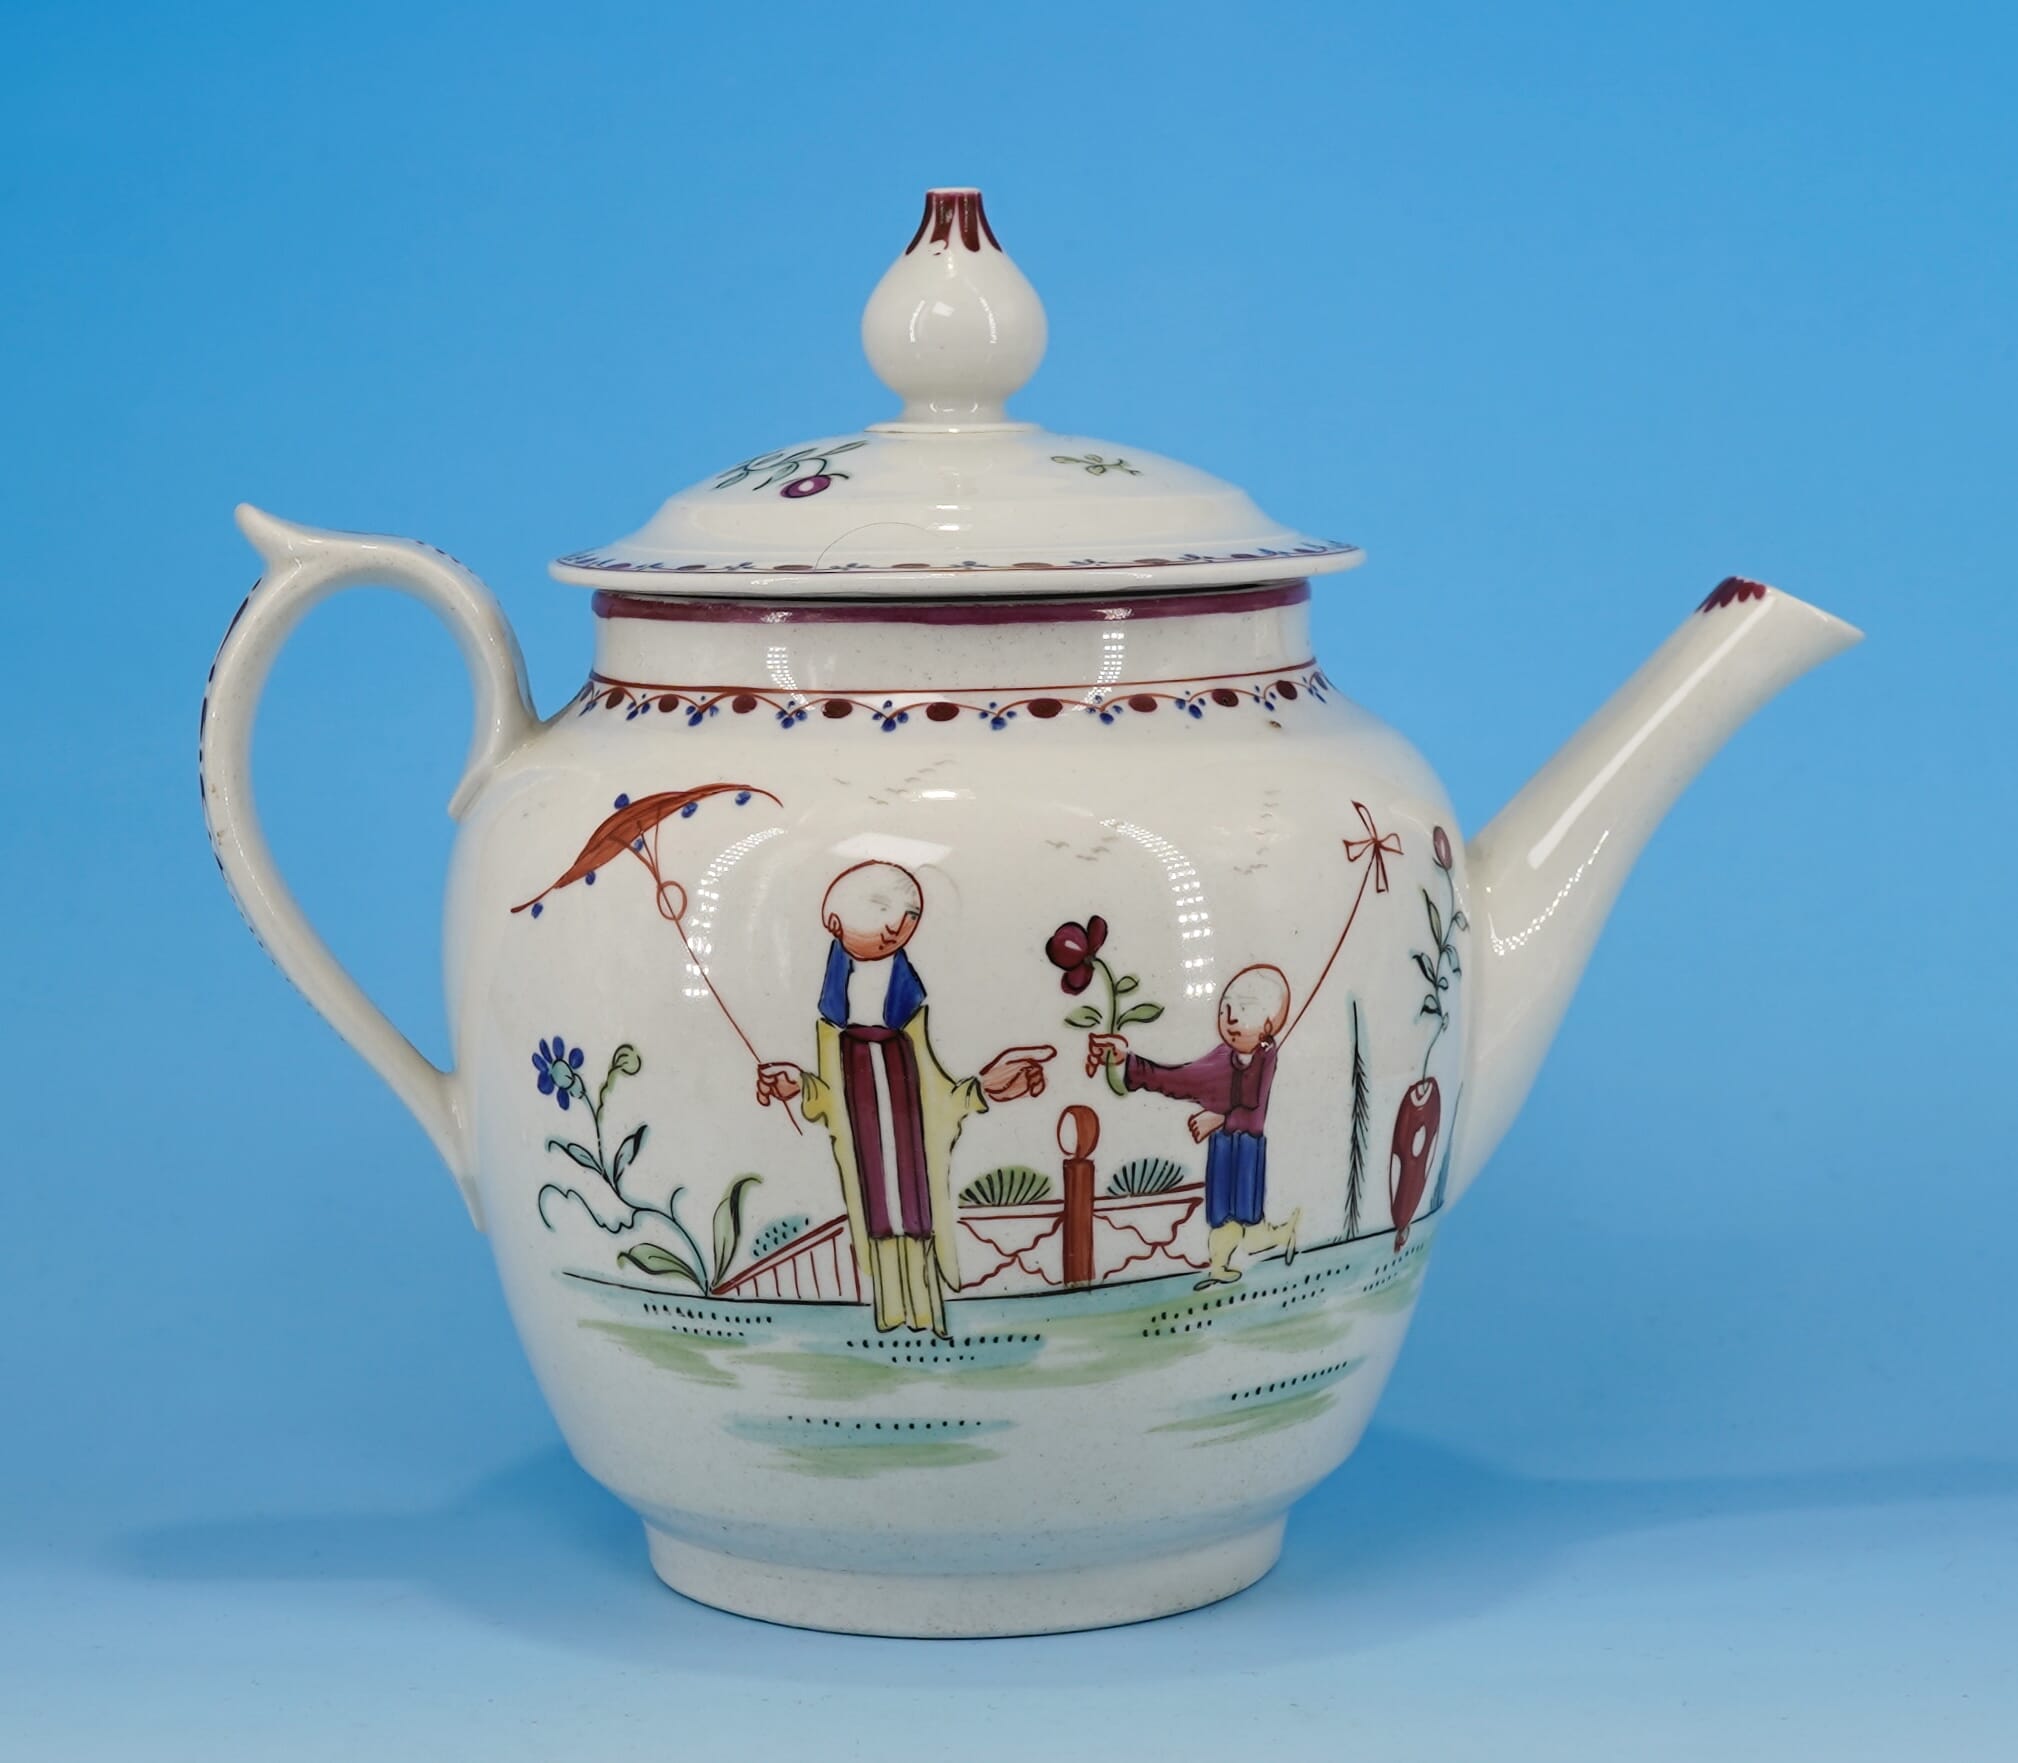 Early Newhall teapot, pattern 20 C Chinoiserie family & fence, c. 1795 C Moorabool Antique Galleries